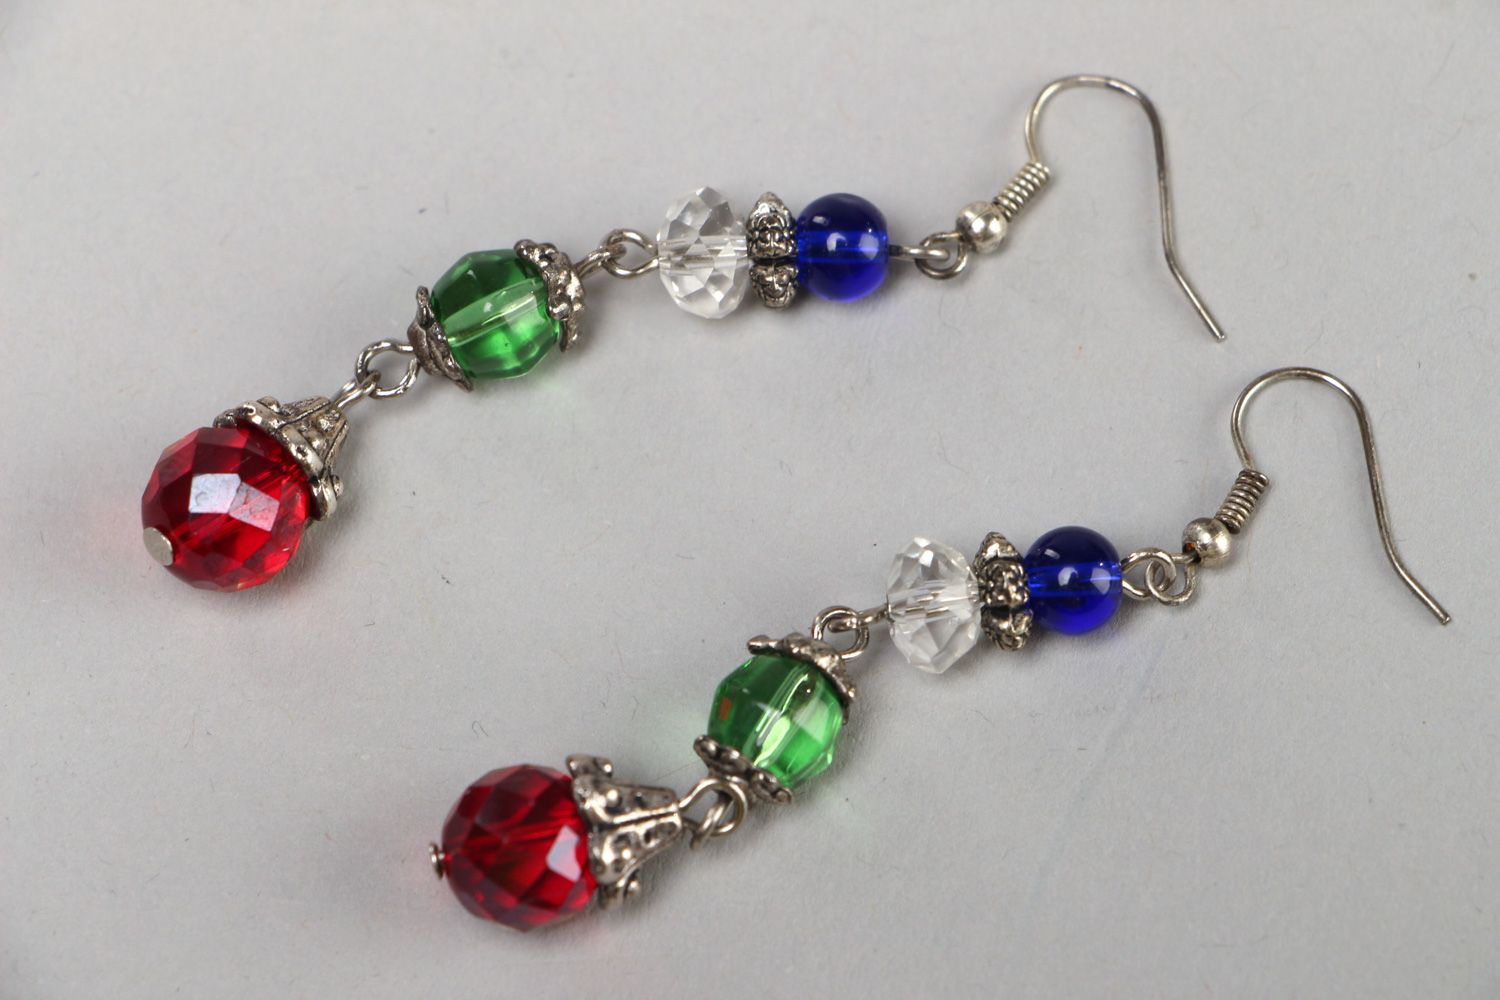 Handmade colorful long earrings with glass beads and metal fittings for ladies photo 1